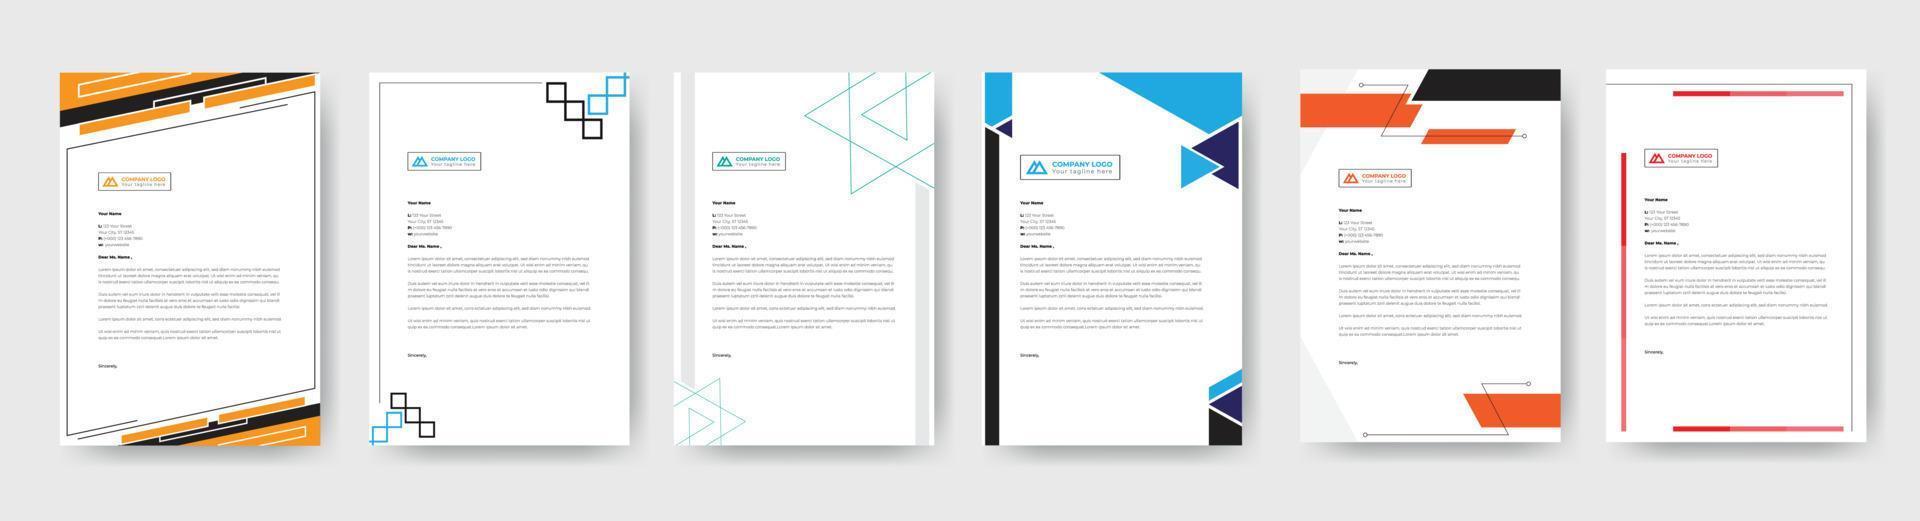 Letterhead Corporate Modern Business Letterhead template design company letterhead Colorful red, green, yellow, blue design stationary project. Multipurpose letterhead  abstract, elegant concept. vector